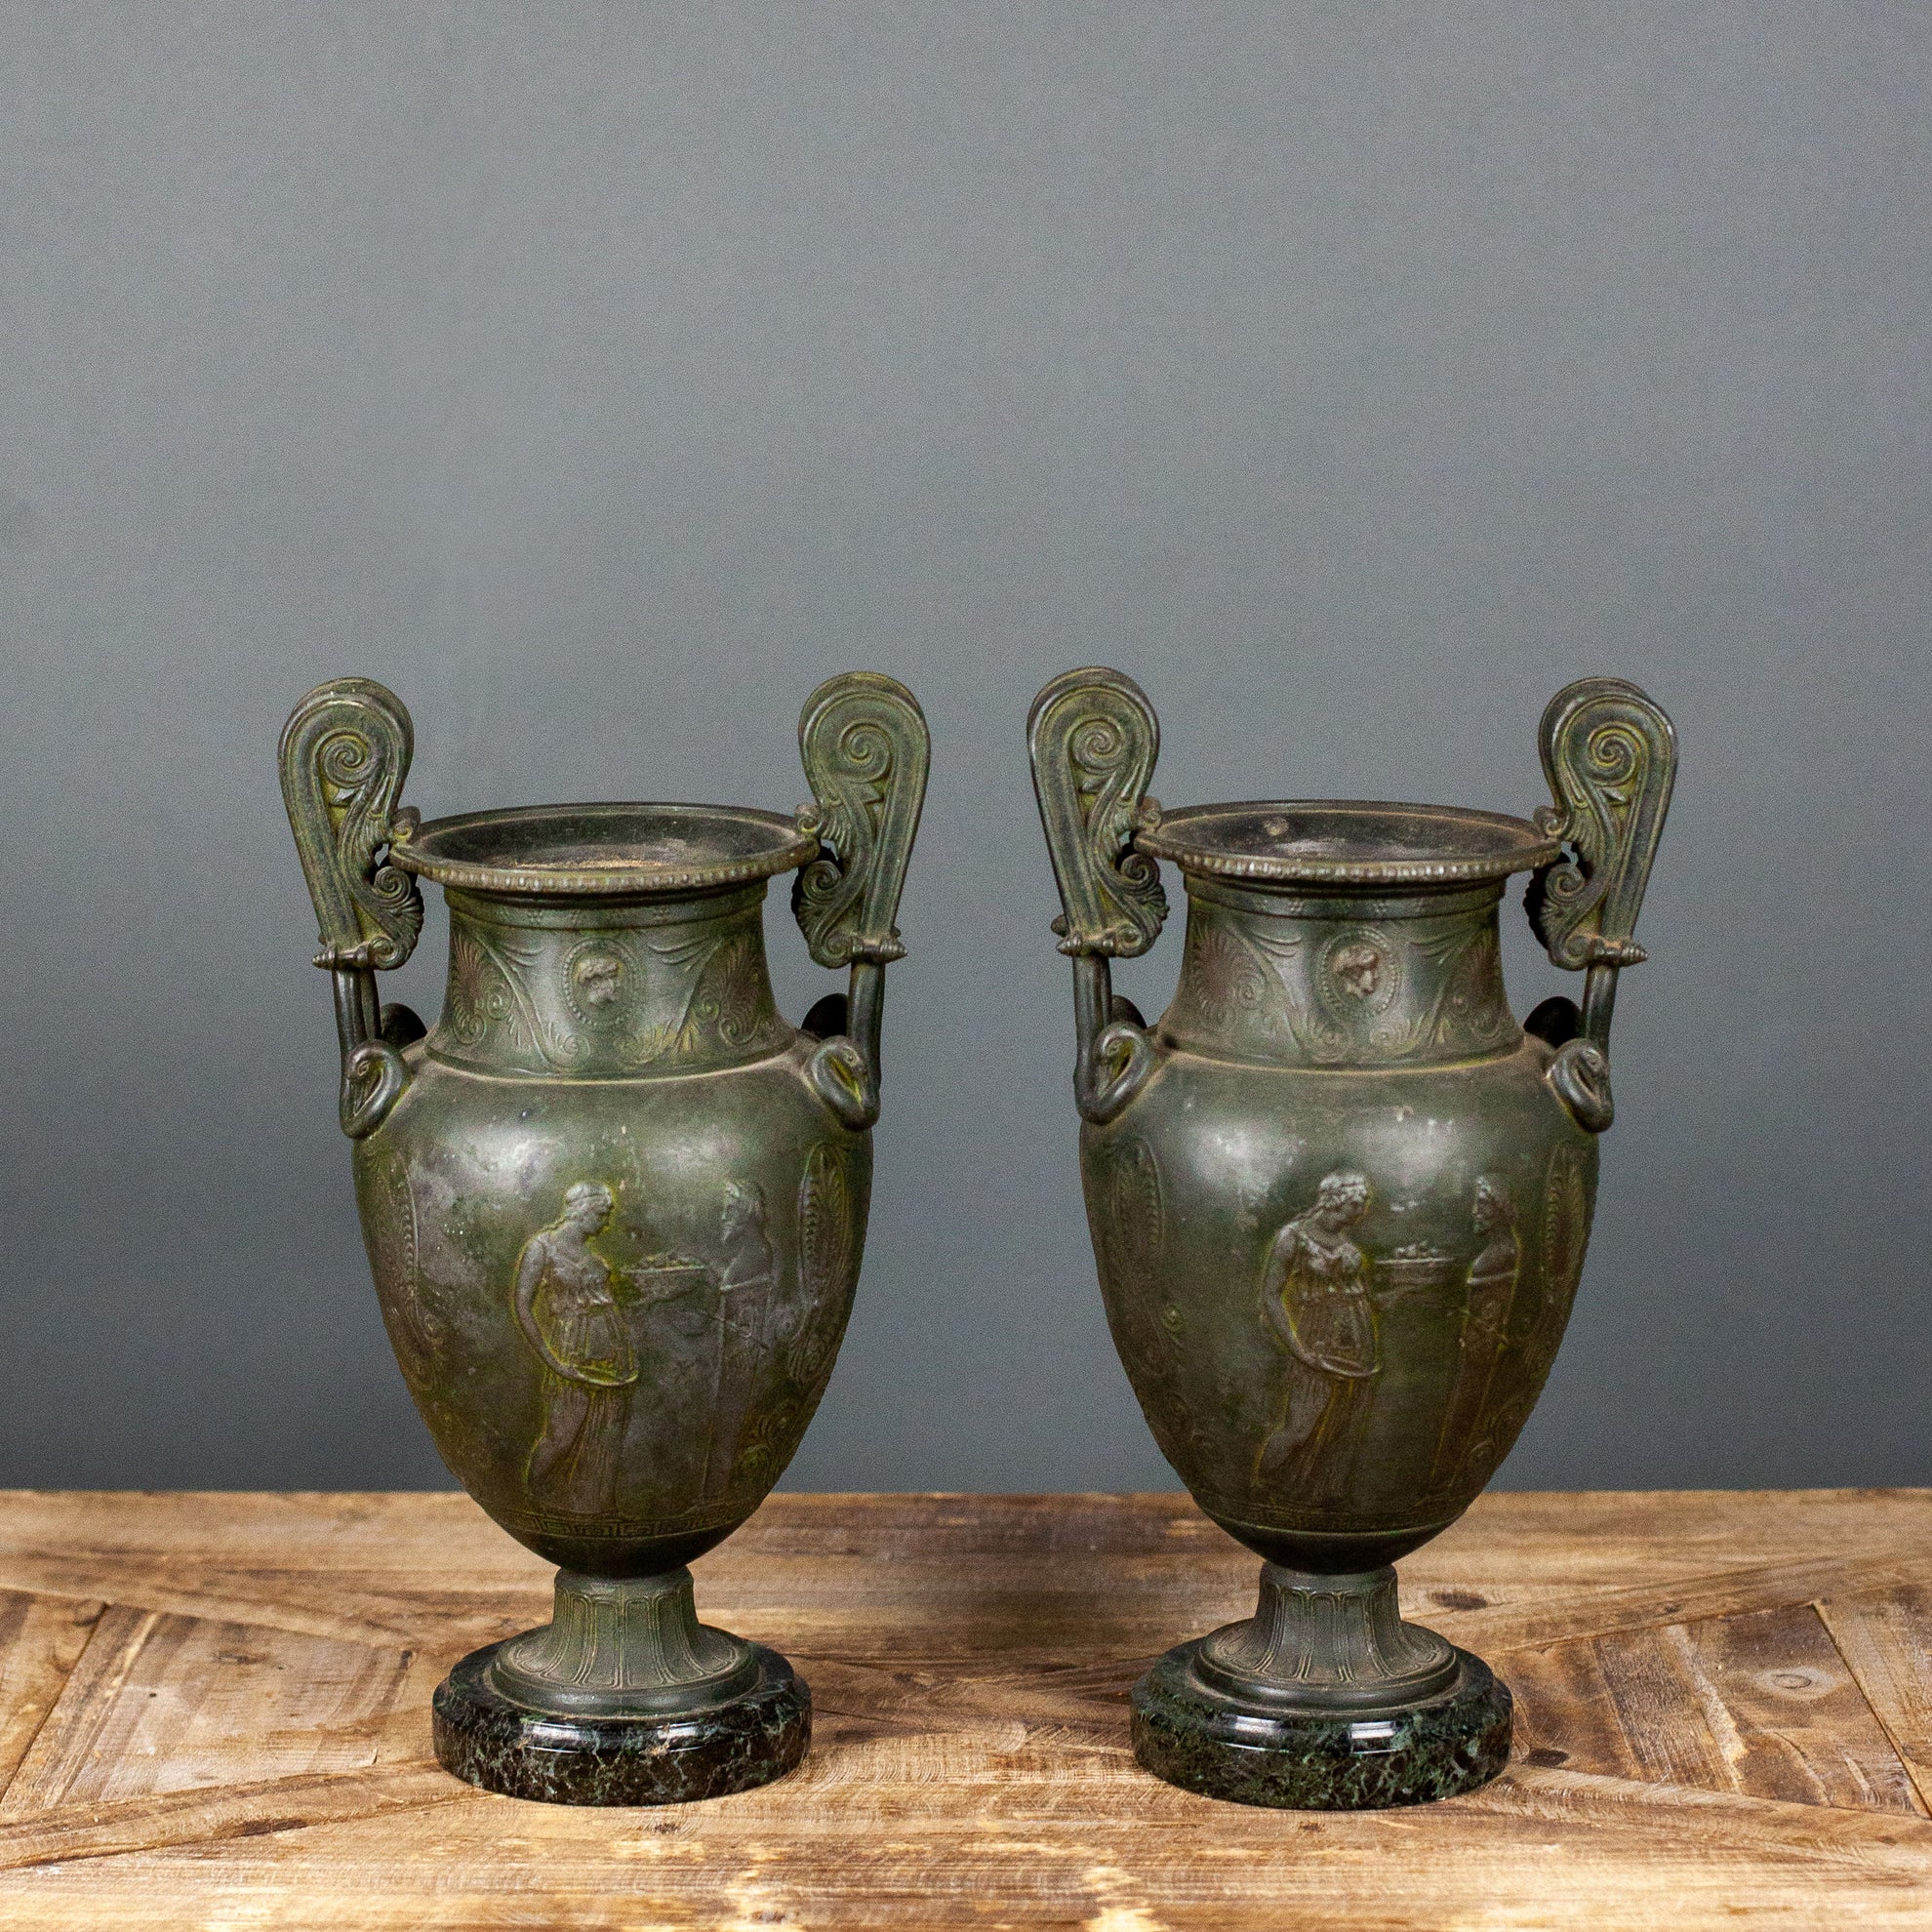 Pair of Neo-Classical Spelter Urns